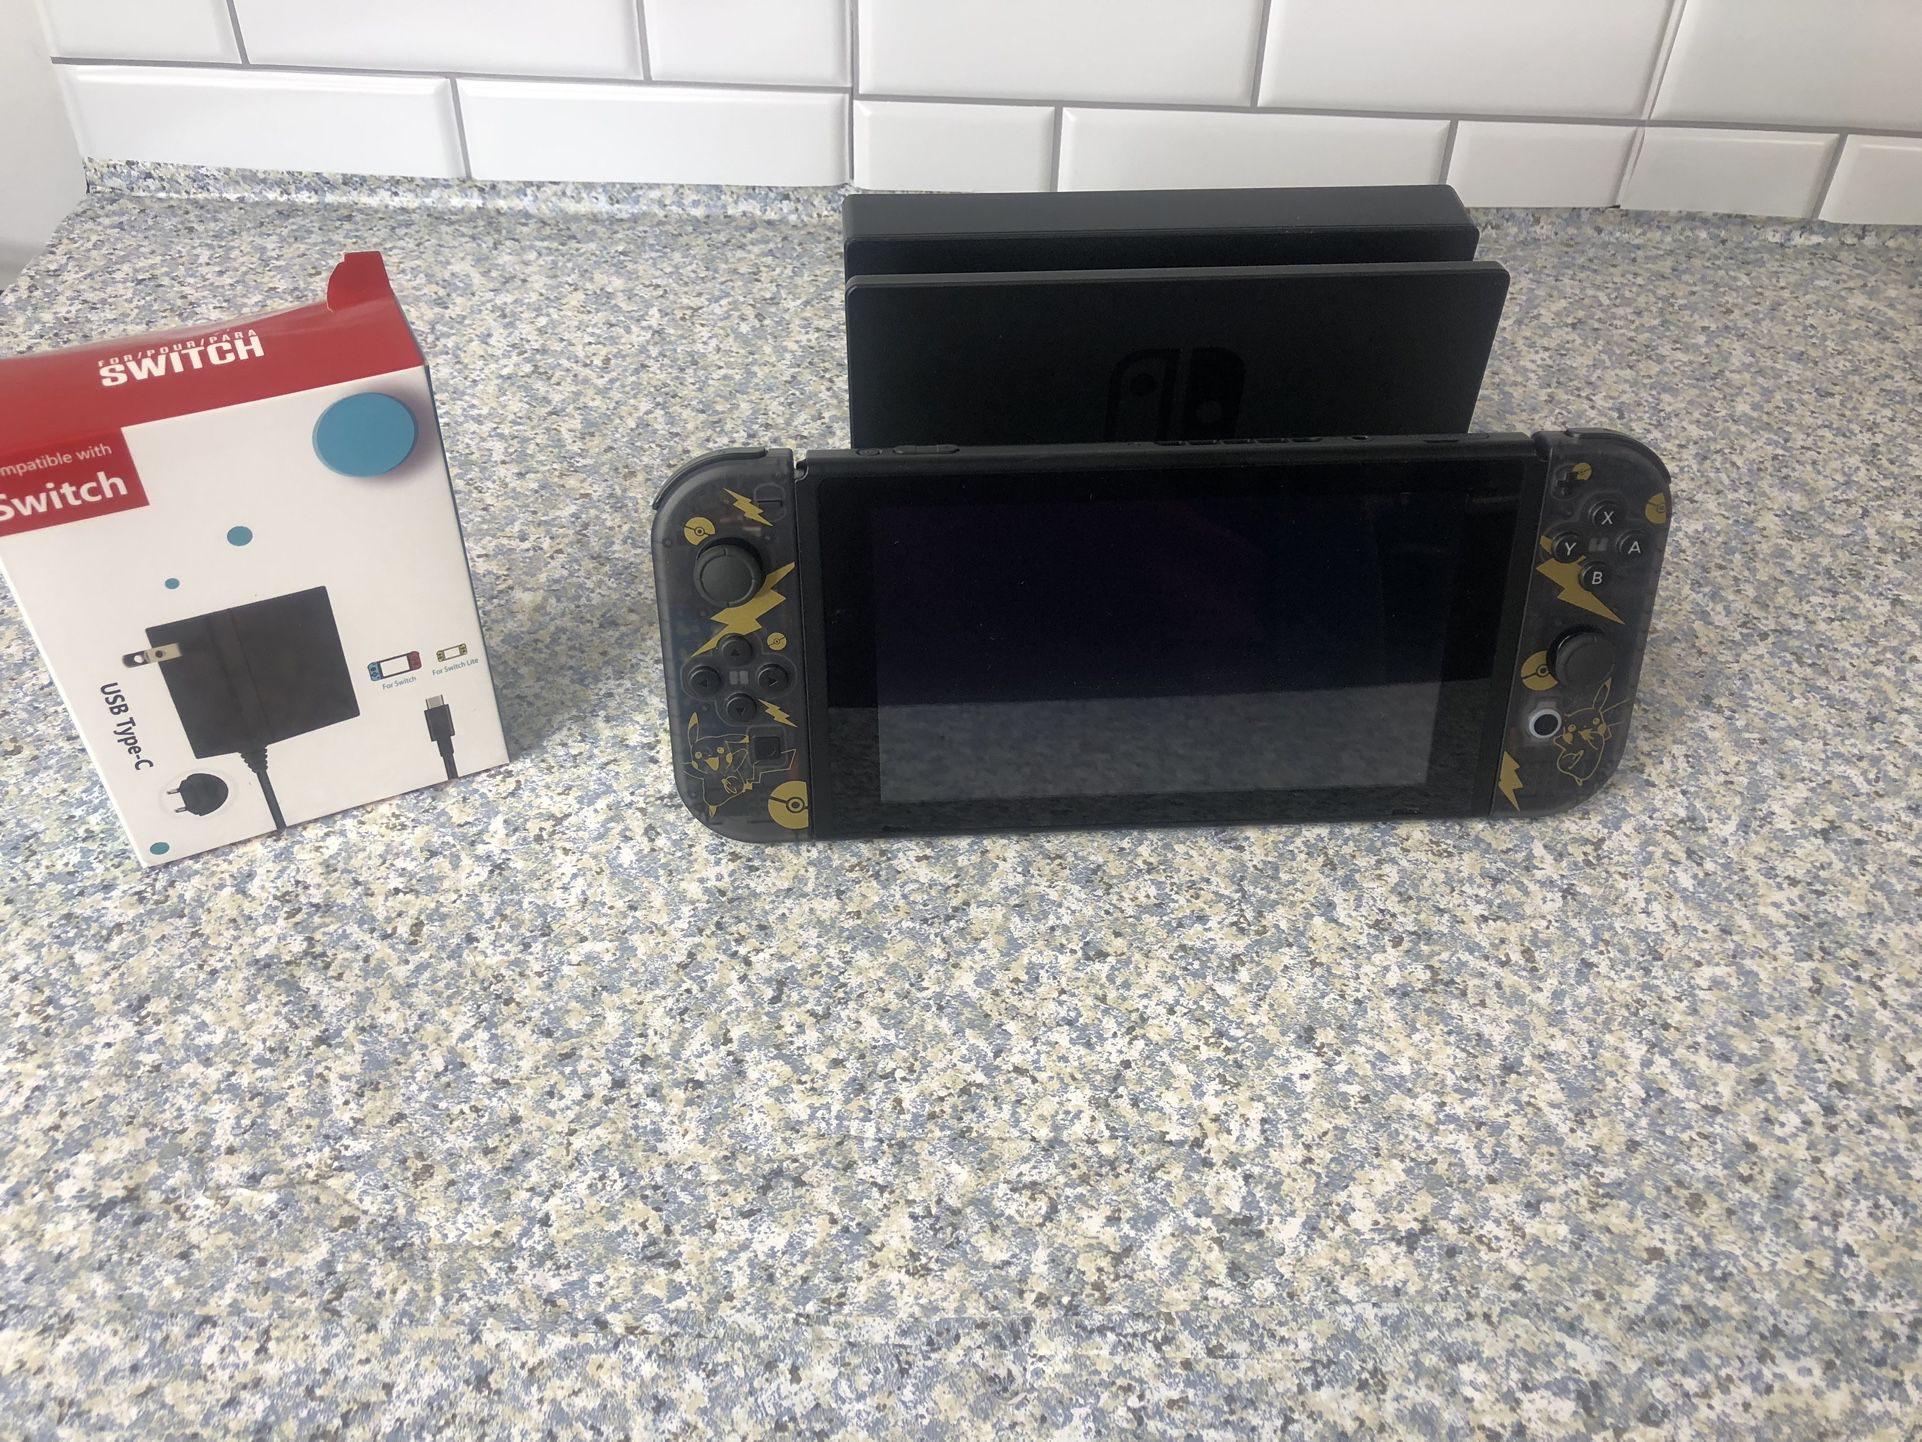 Nintendo Switch 32 gb with docking station no offers or trades please!!